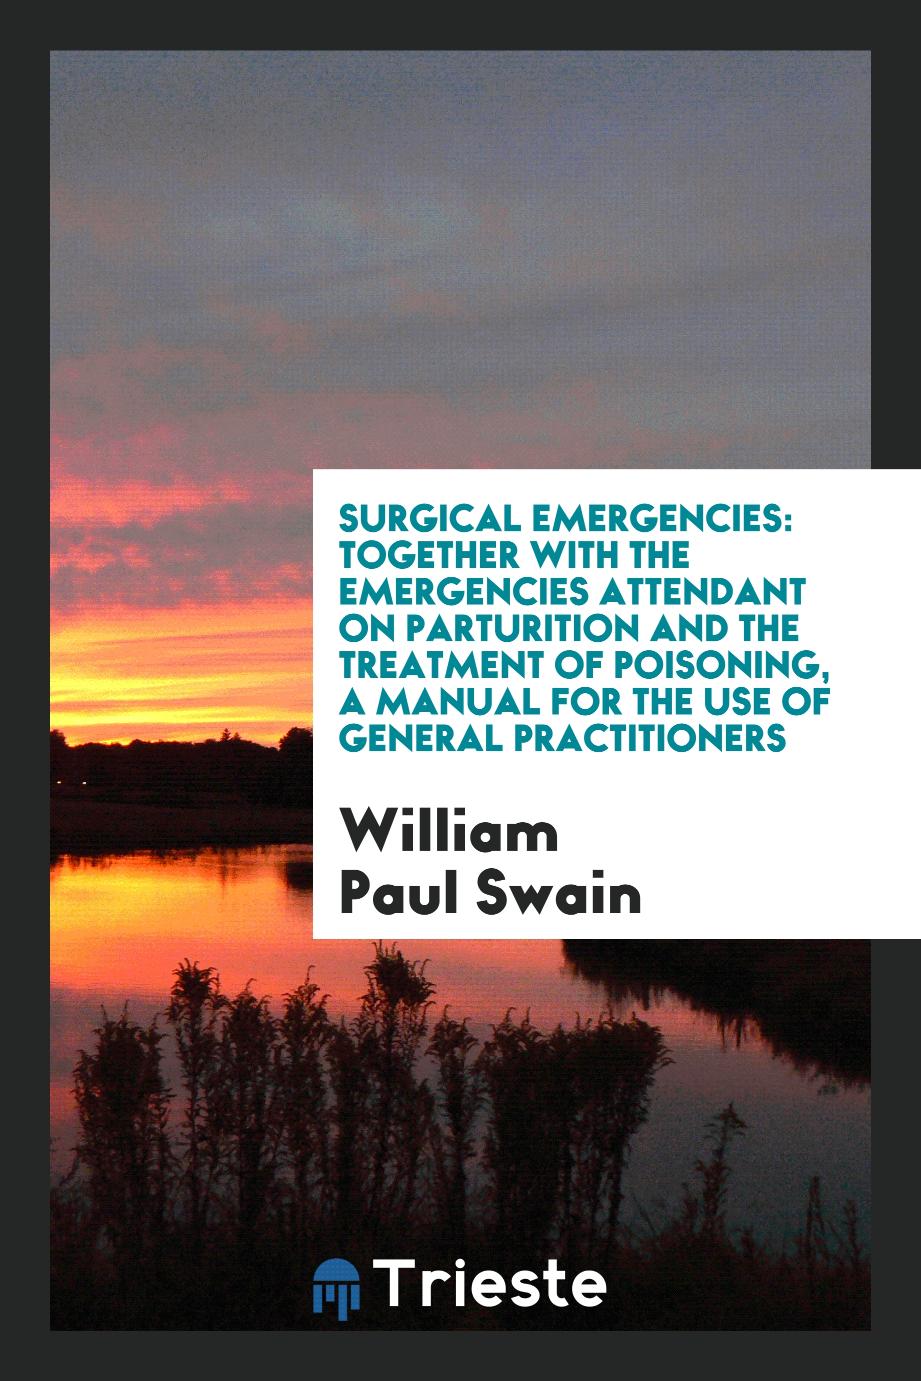 Surgical Emergencies: Together with the Emergencies Attendant on Parturition and the Treatment of Poisoning, a Manual for the Use of General Practitioners